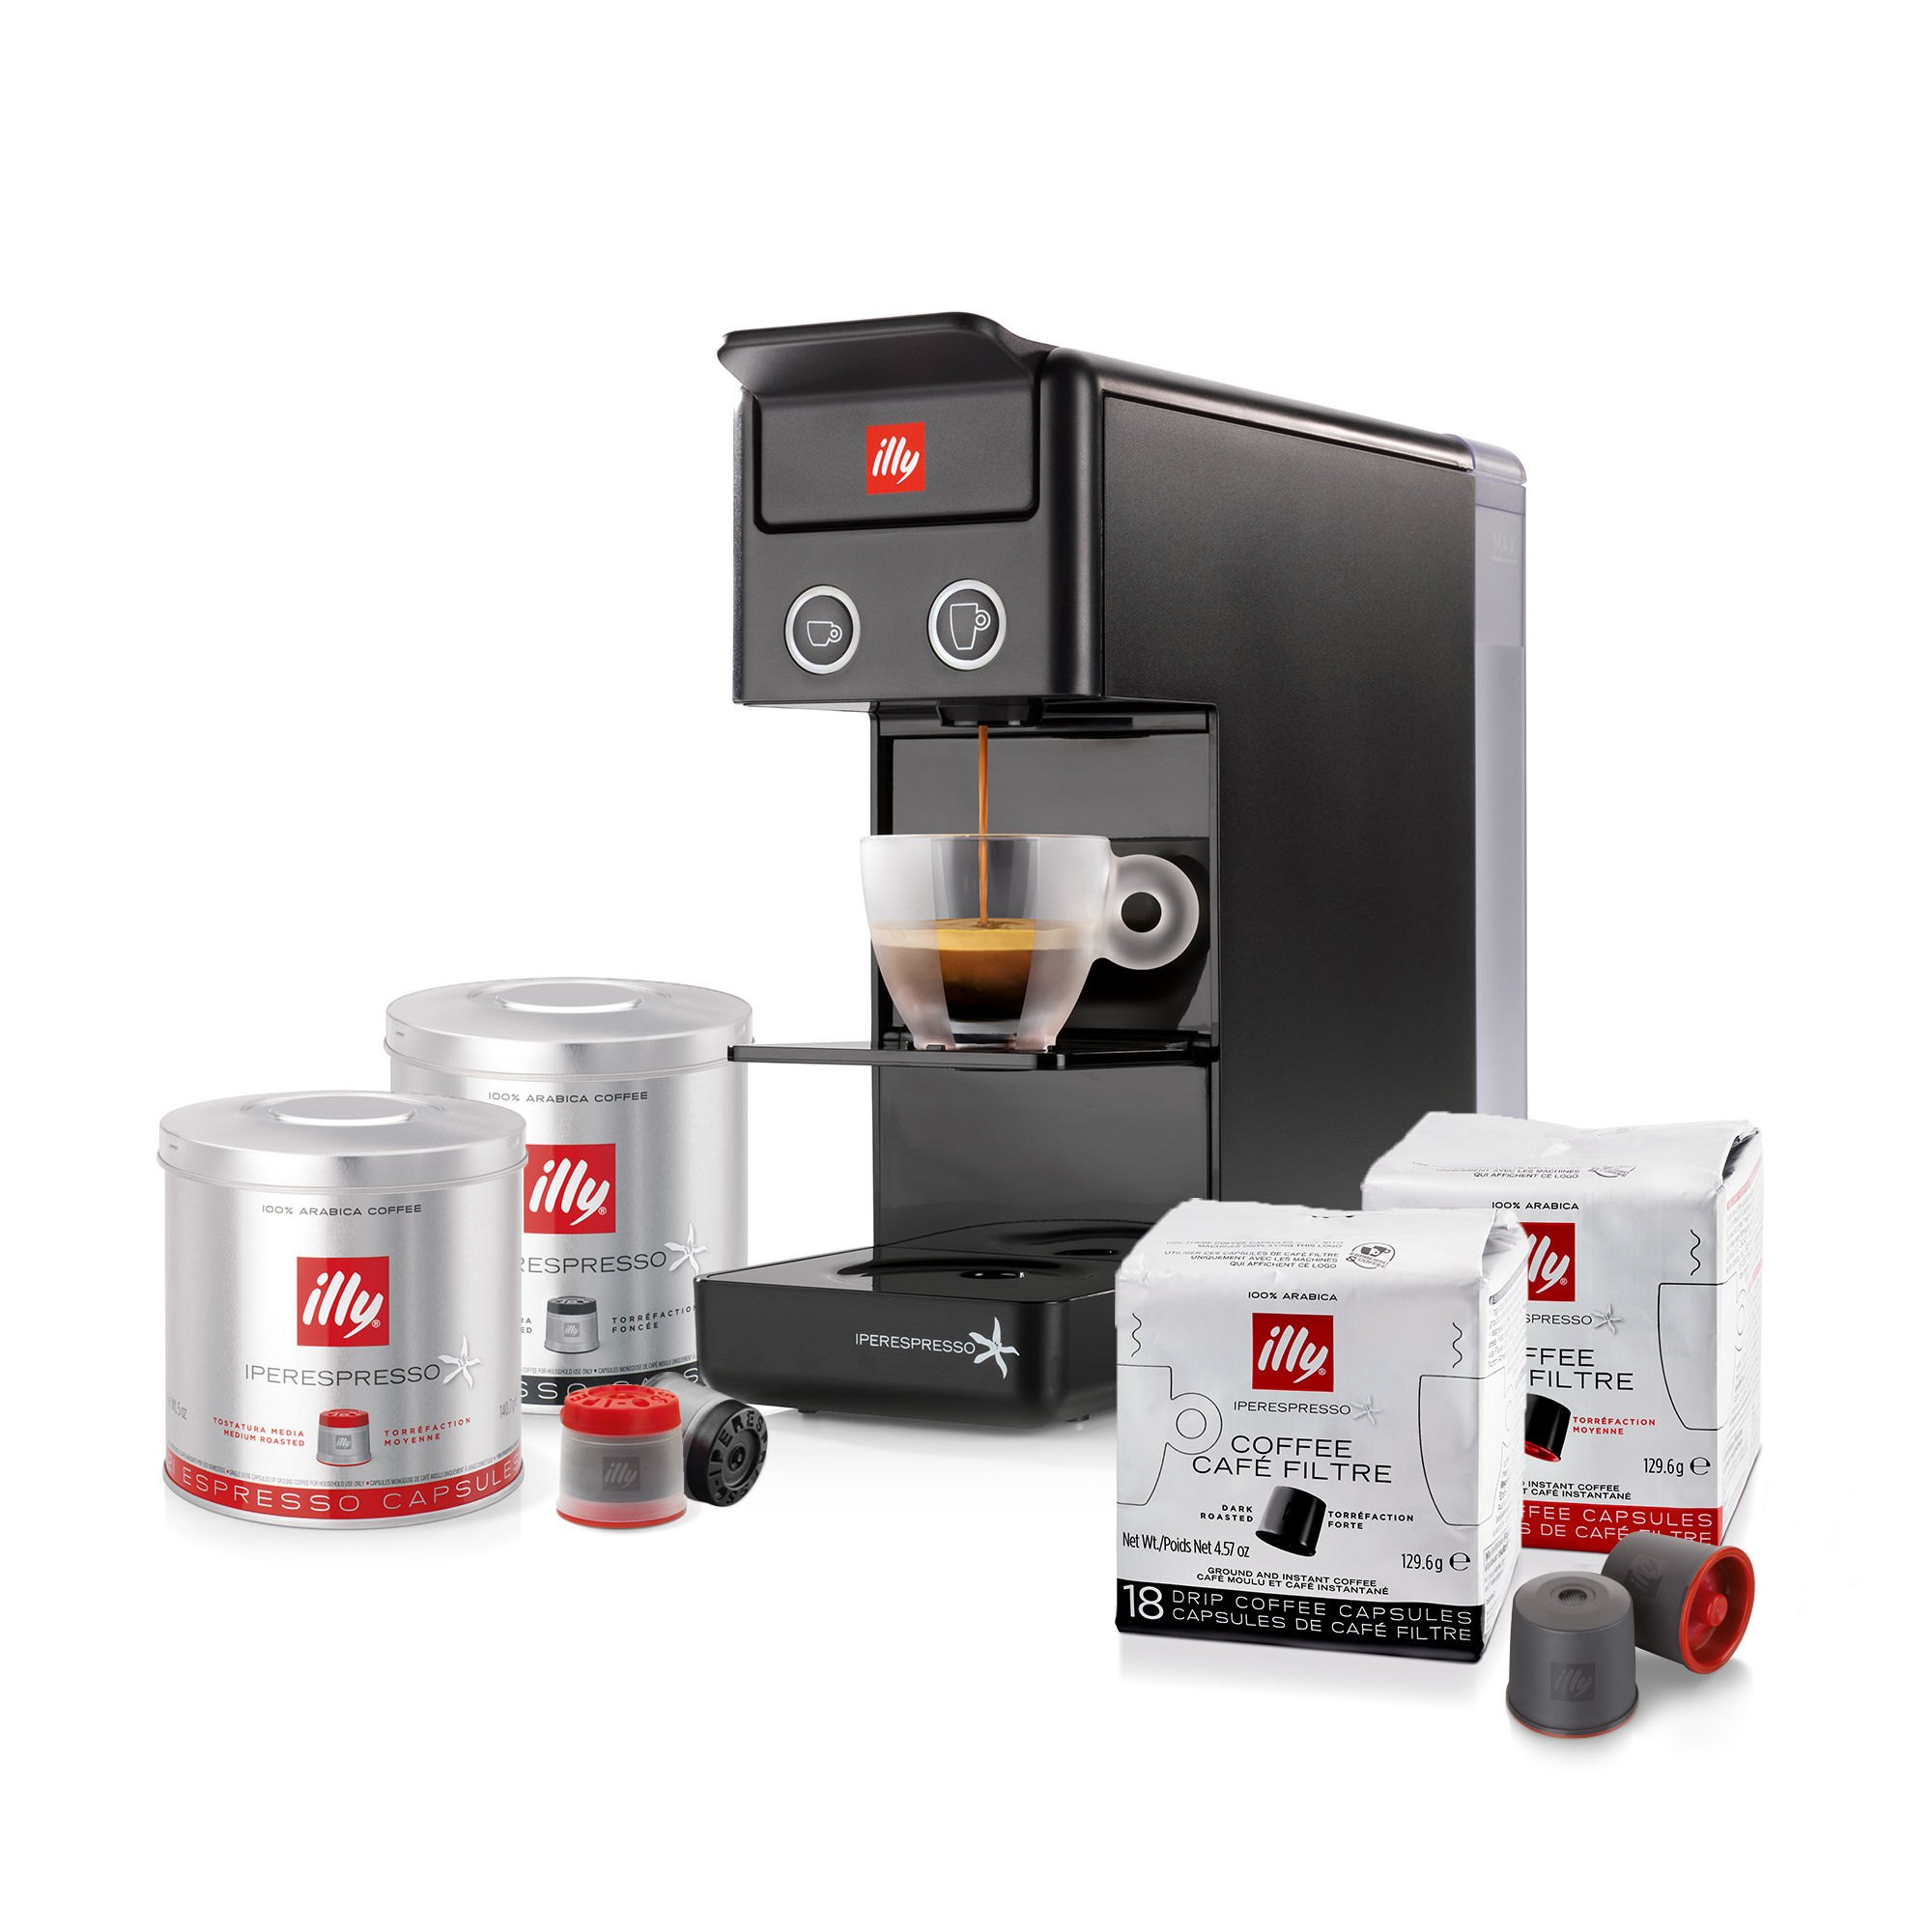 Black Francis Francis by illy Y5 DUO iperespresso /& filter capsule coffee maker